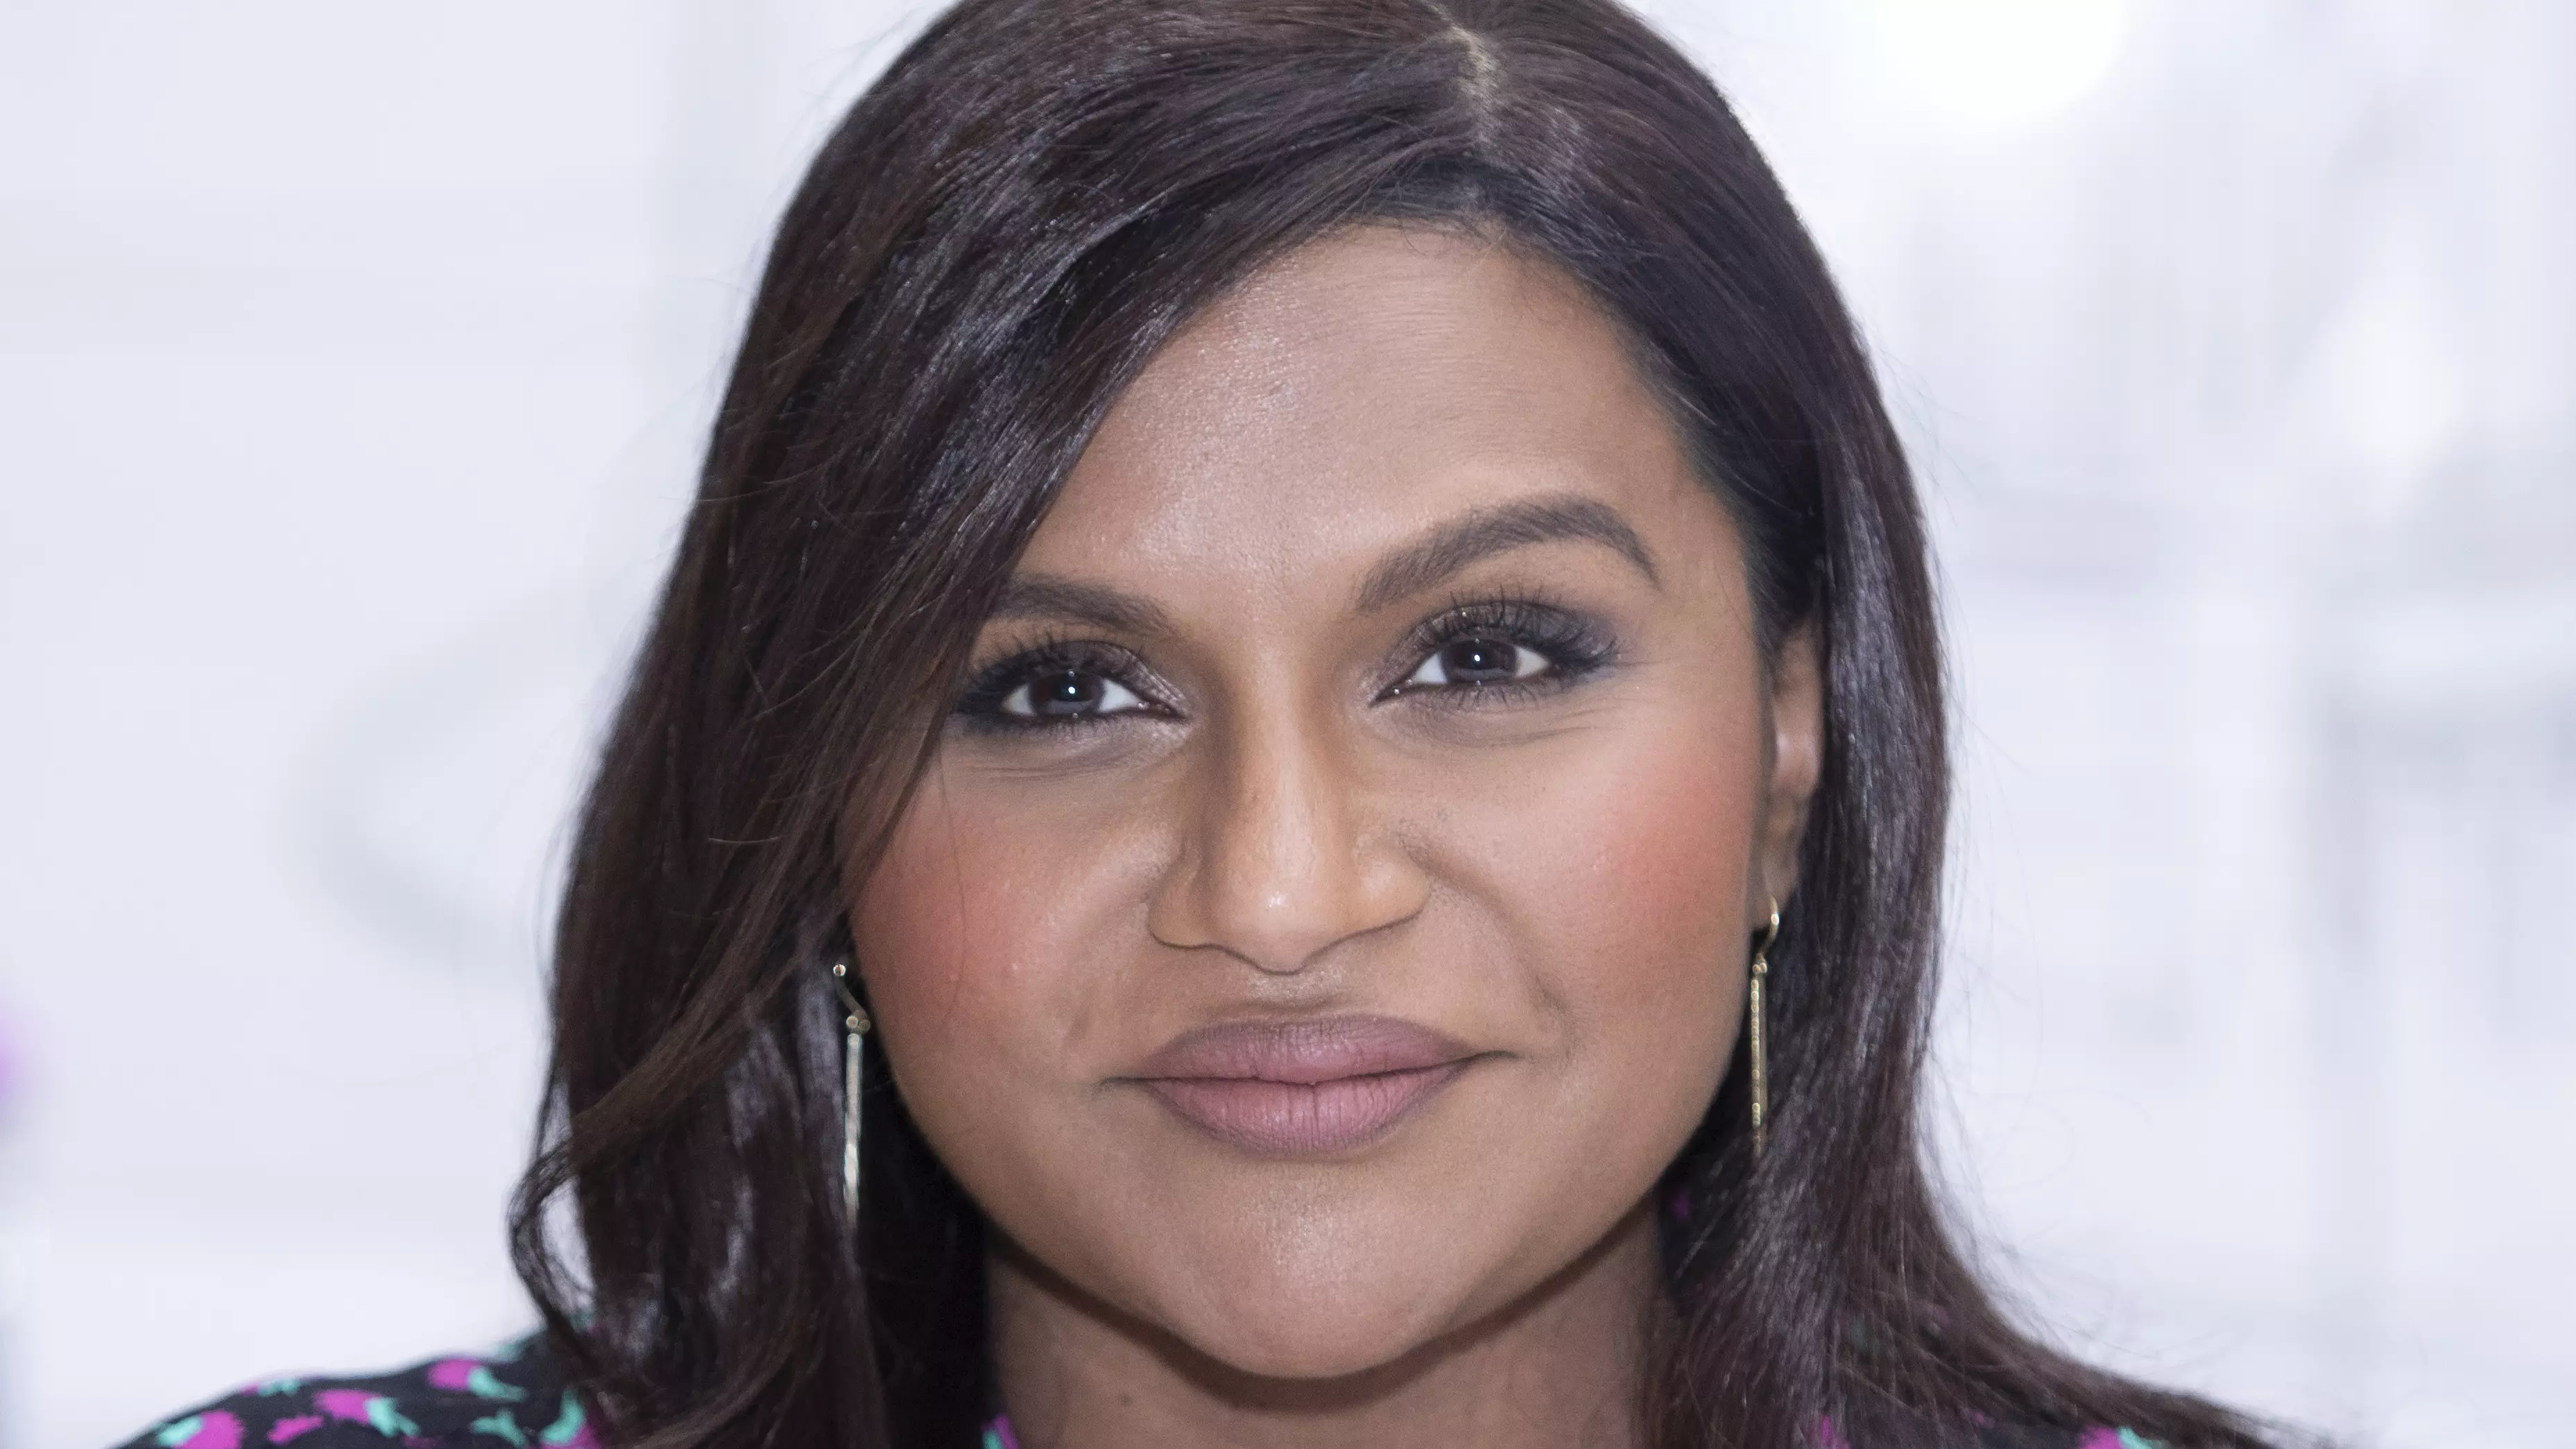 Mindy Kaling Responds To Backlash Over Playing Velma In 'Scooby-Doo' Spin-Off